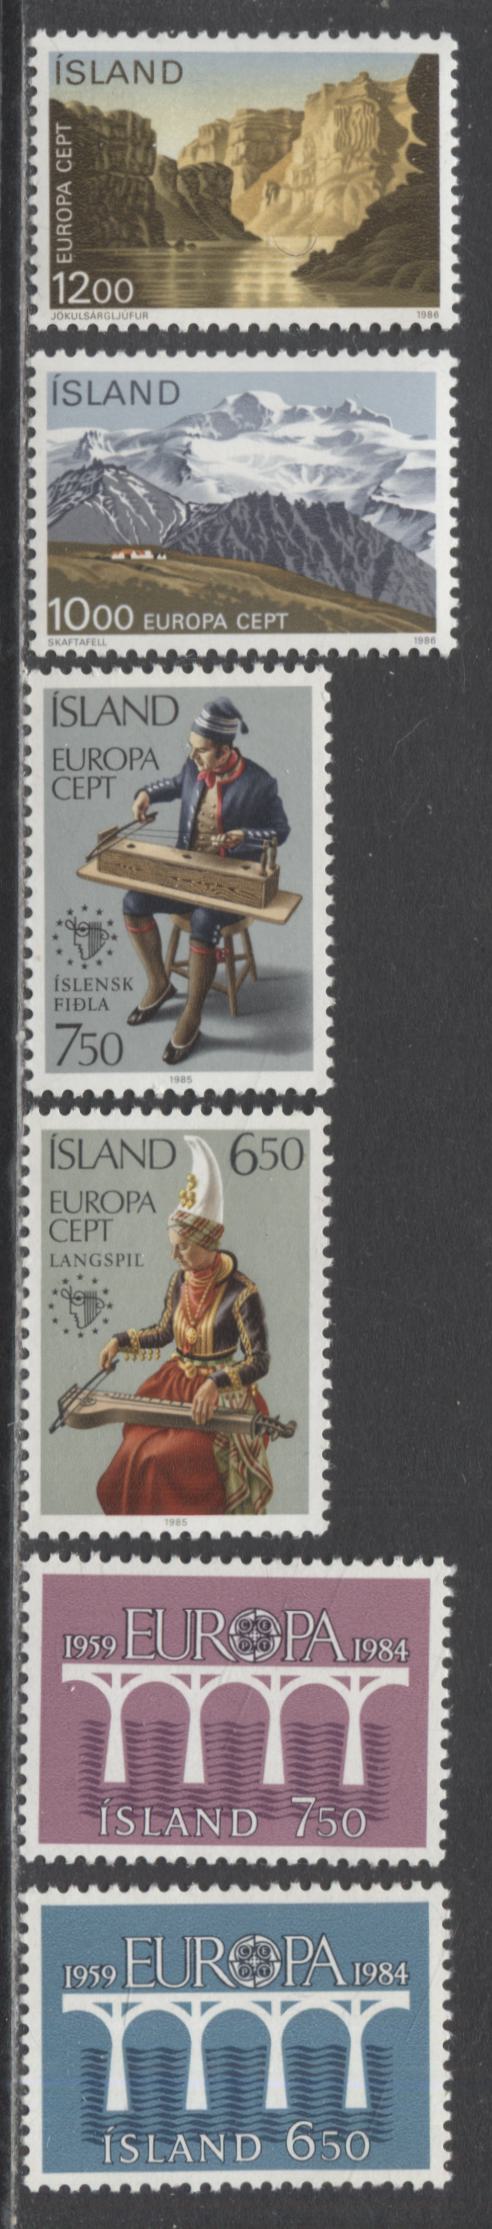 Lot 73 Iceland SC#588/623 1984-1986 Europa Issues, 6 VFNH Singles, Click on Listing to See ALL Pictures, 2017 Scott Cat. $29.75 USD